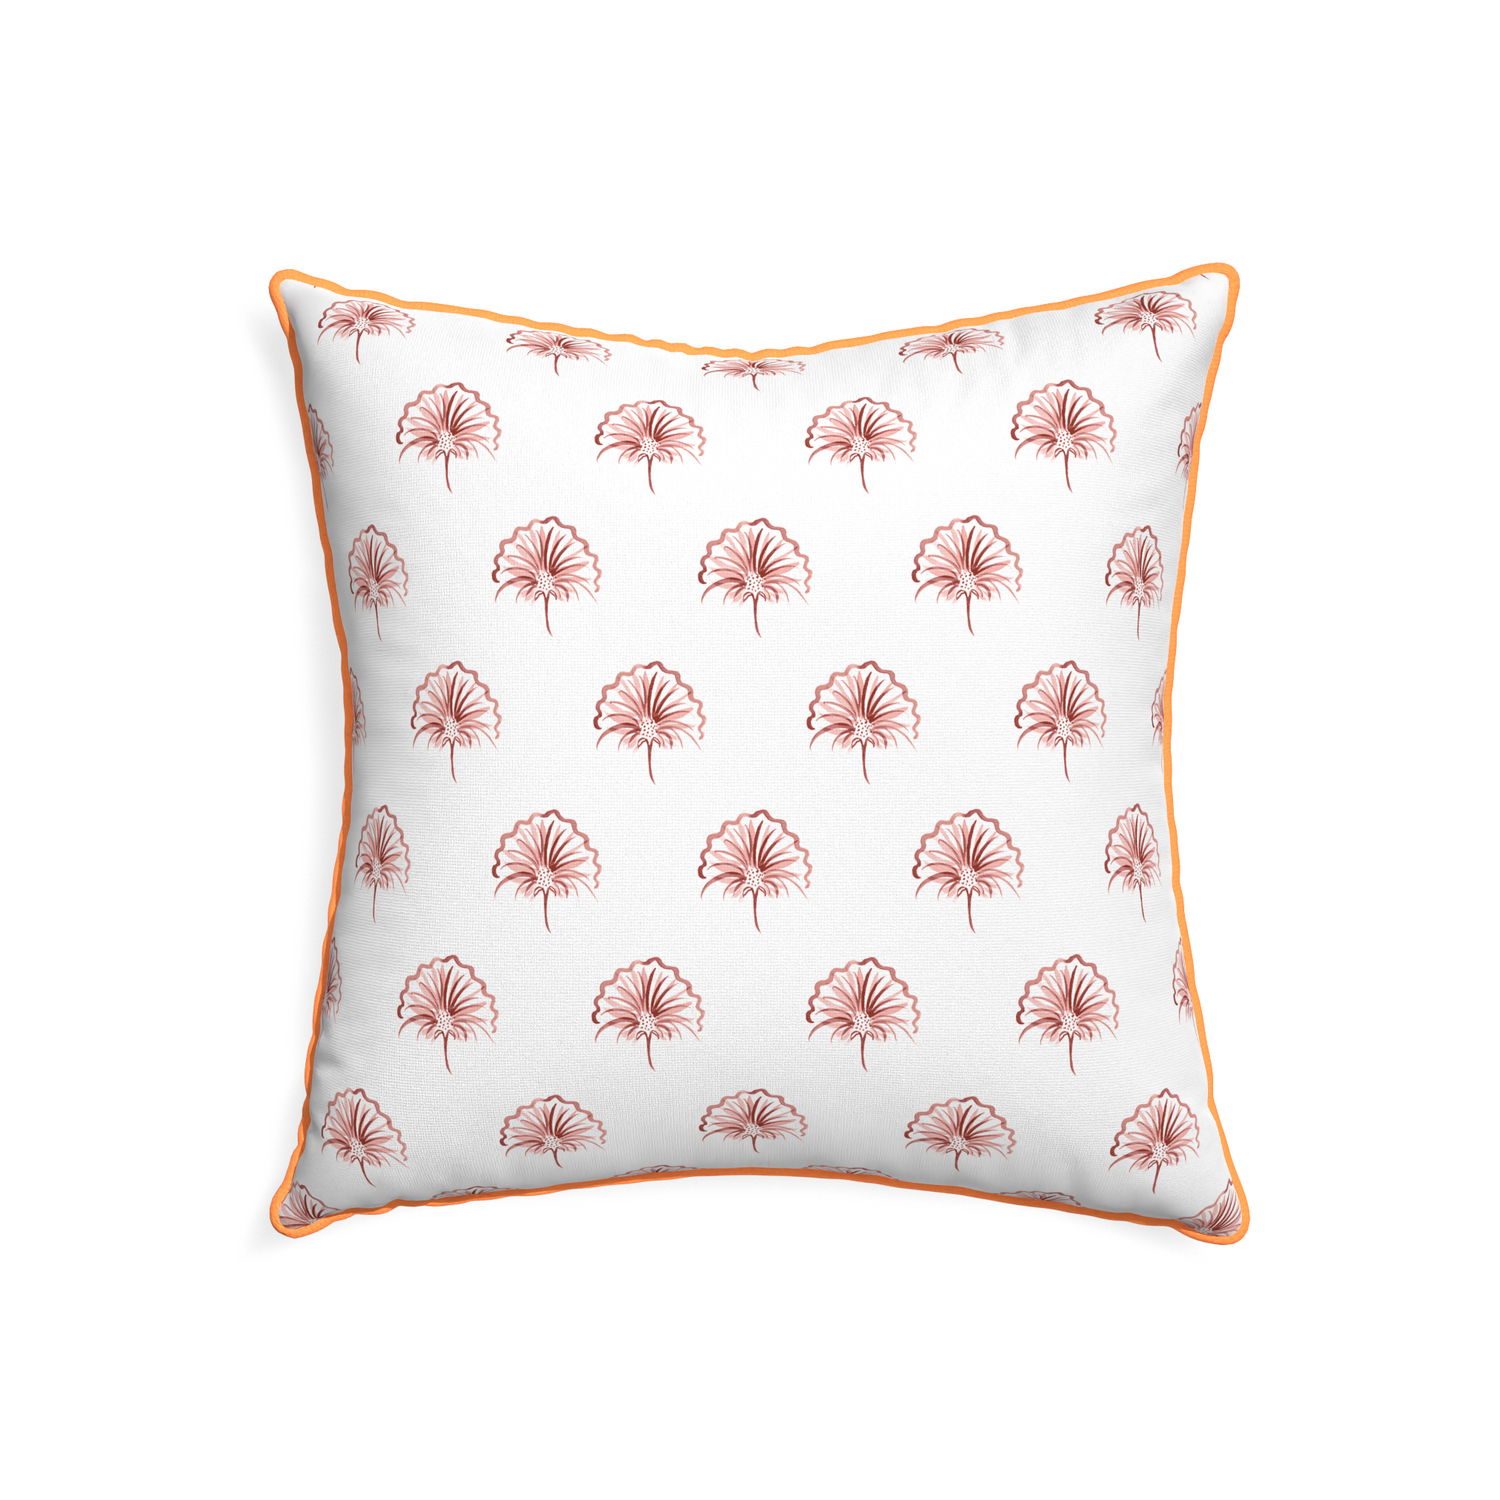 22-square penelope rose custom floral pinkpillow with clementine piping on white background